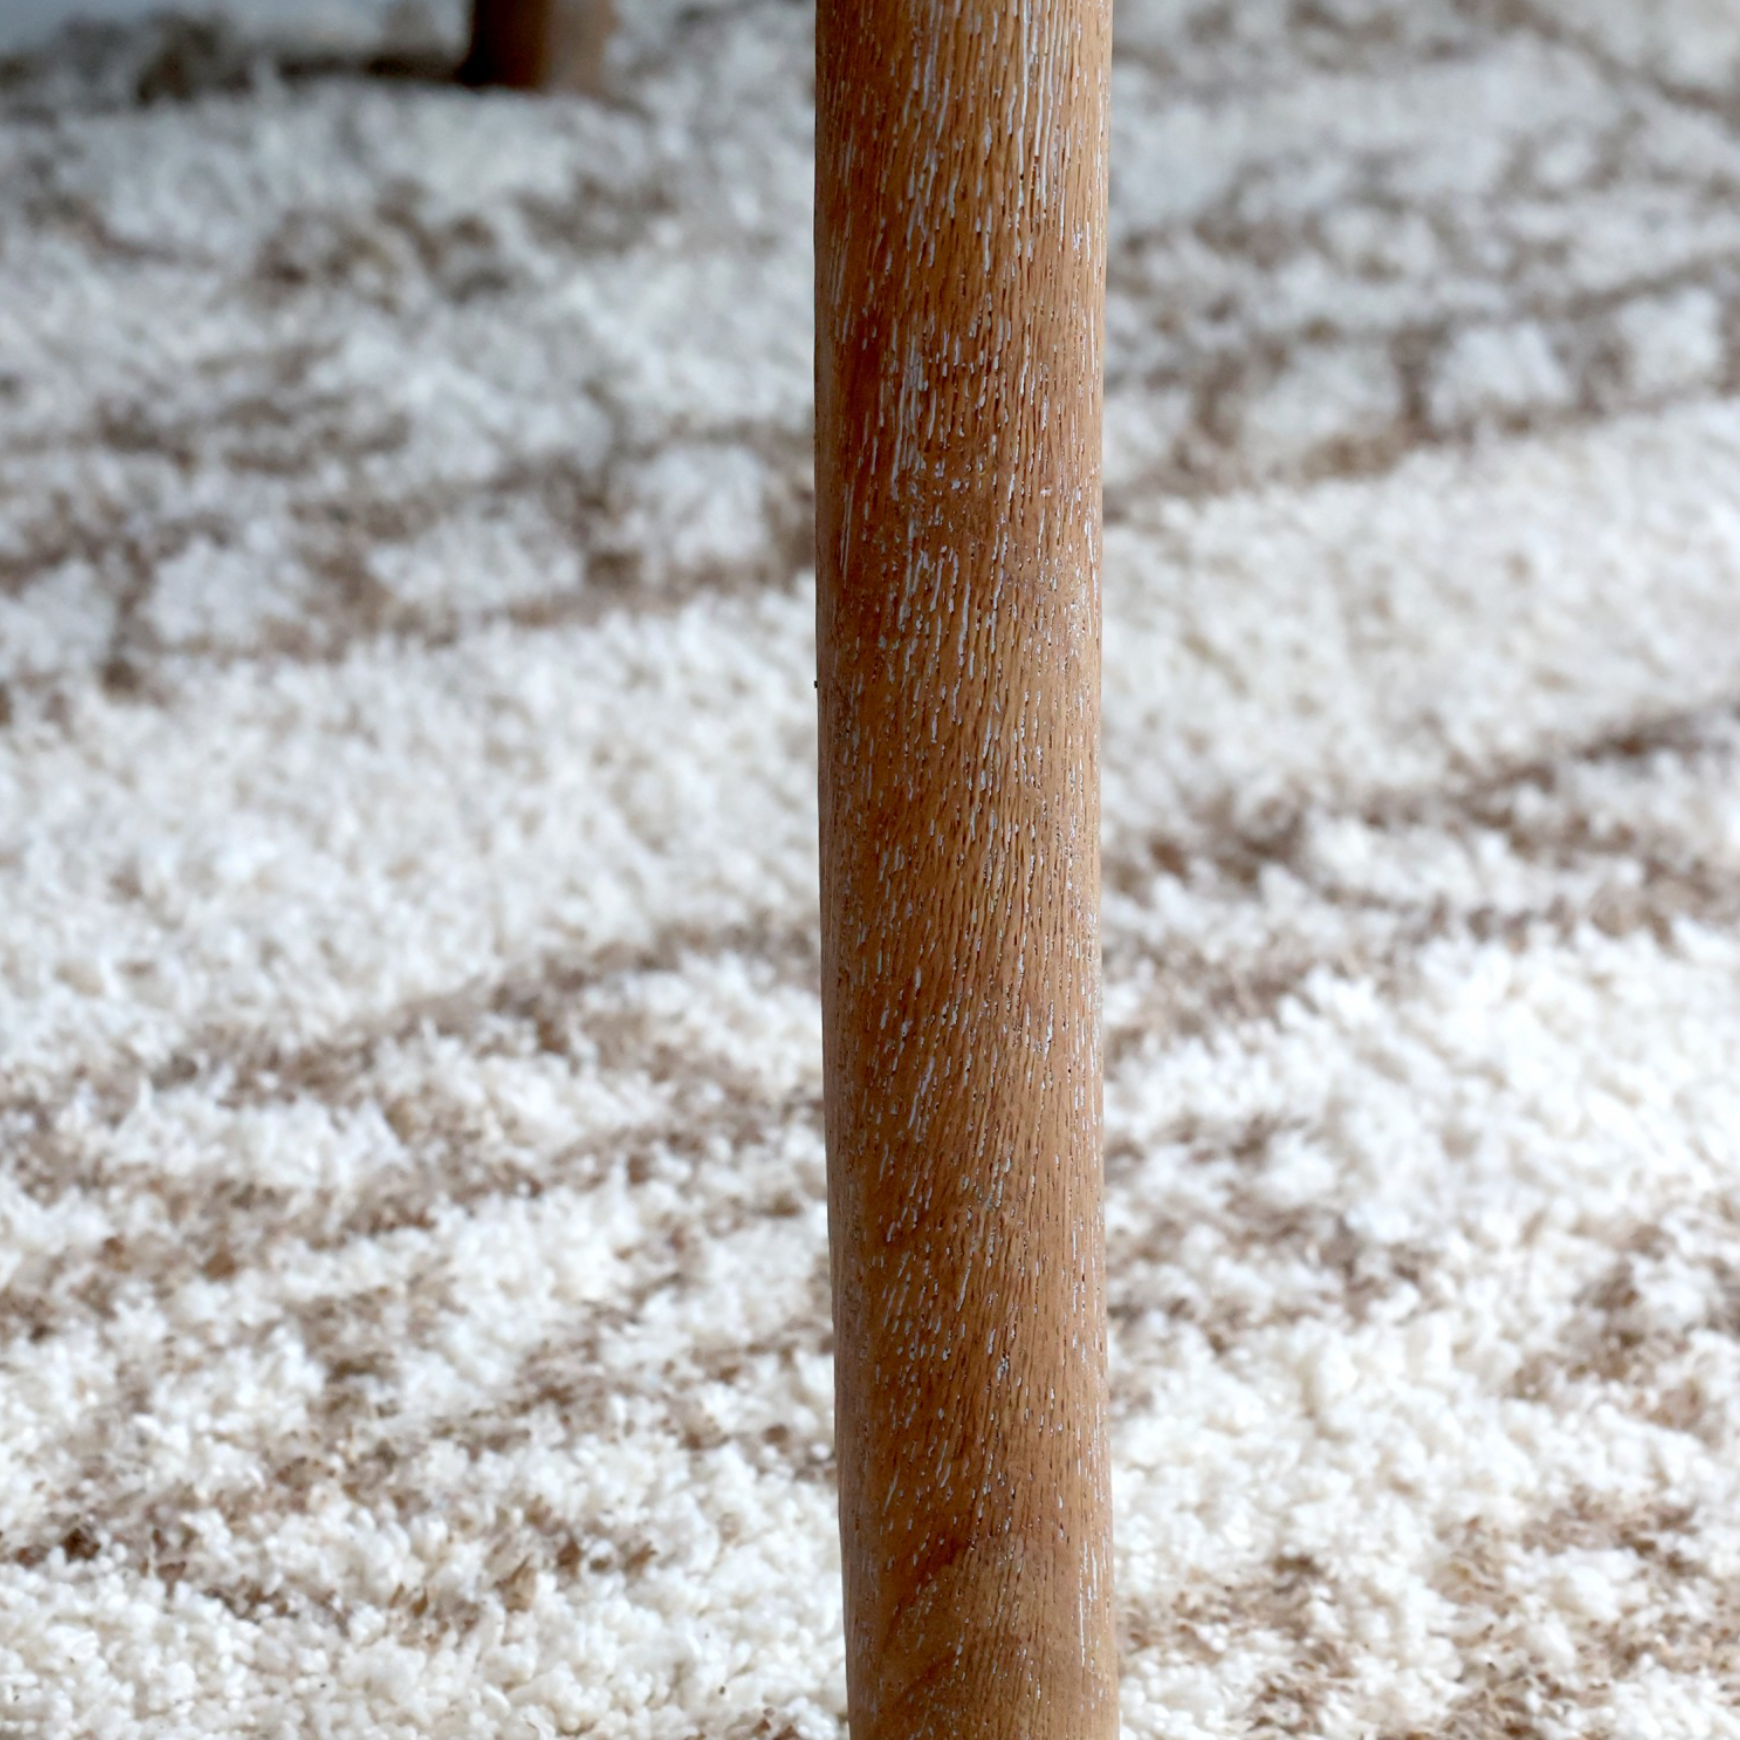 A close up image of a wooden dining chair&#39;s leg.